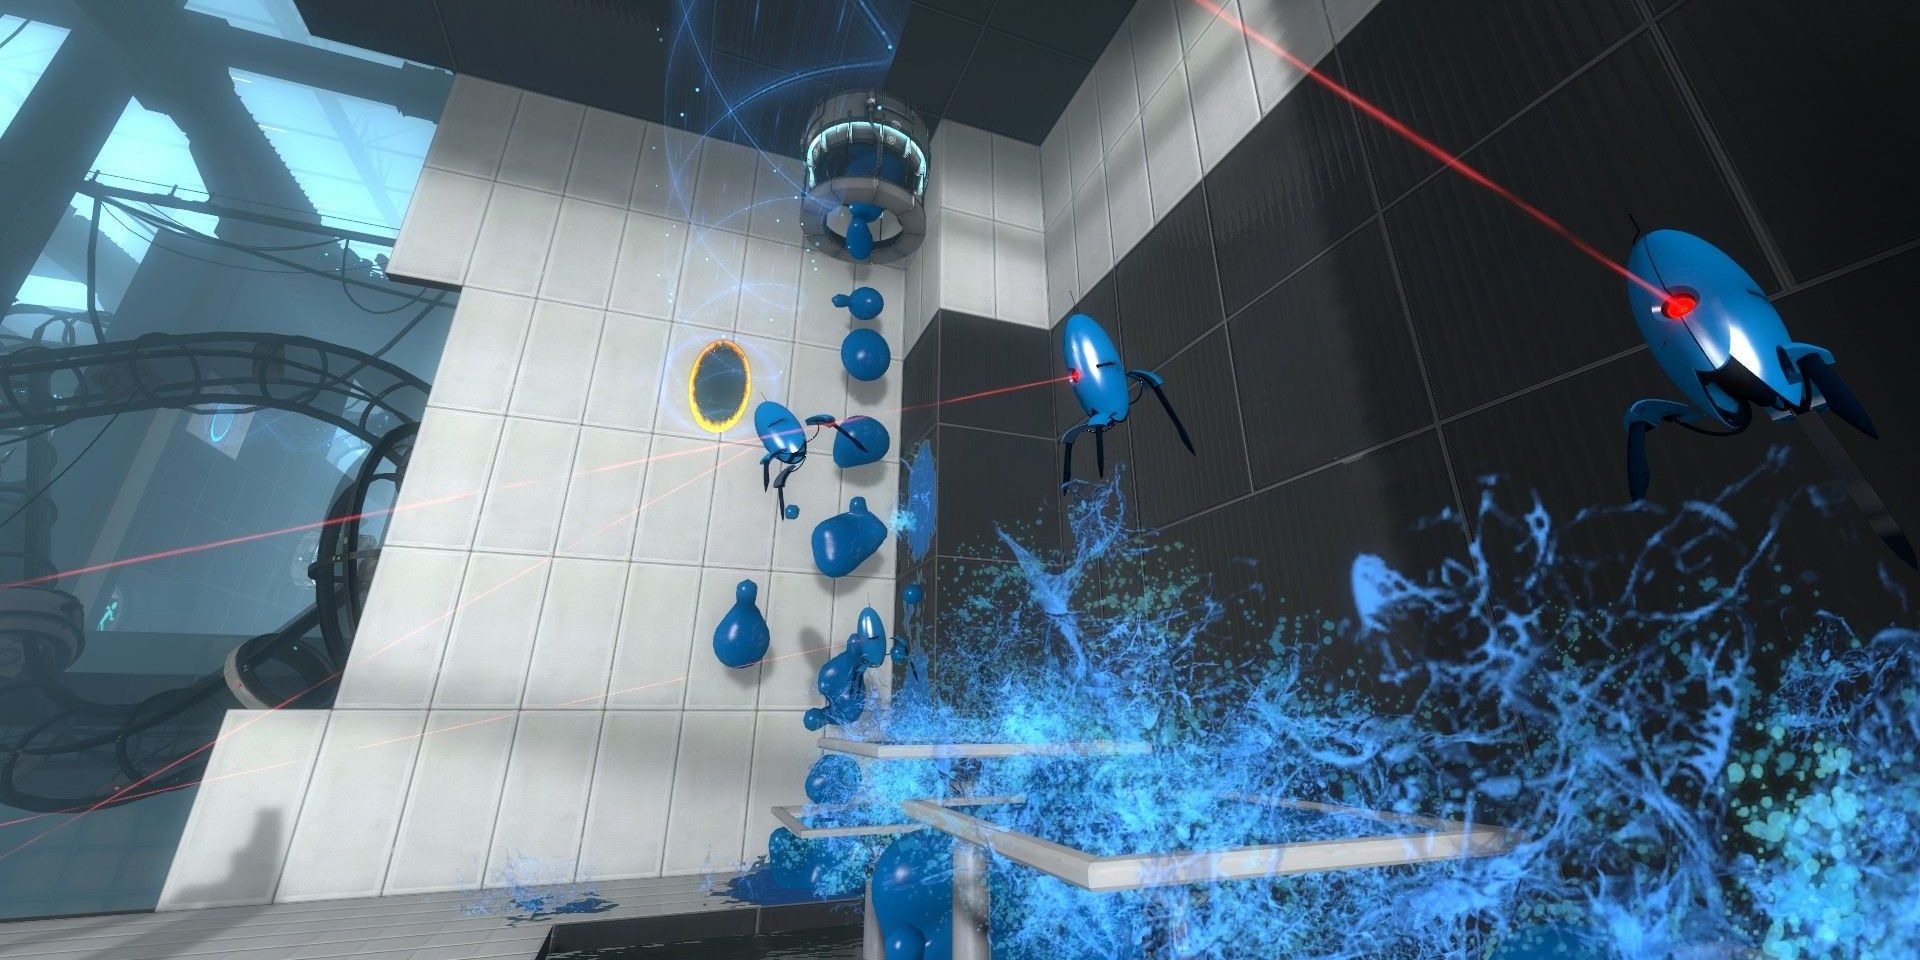 Turrents being bounced around with gel in Portal 2